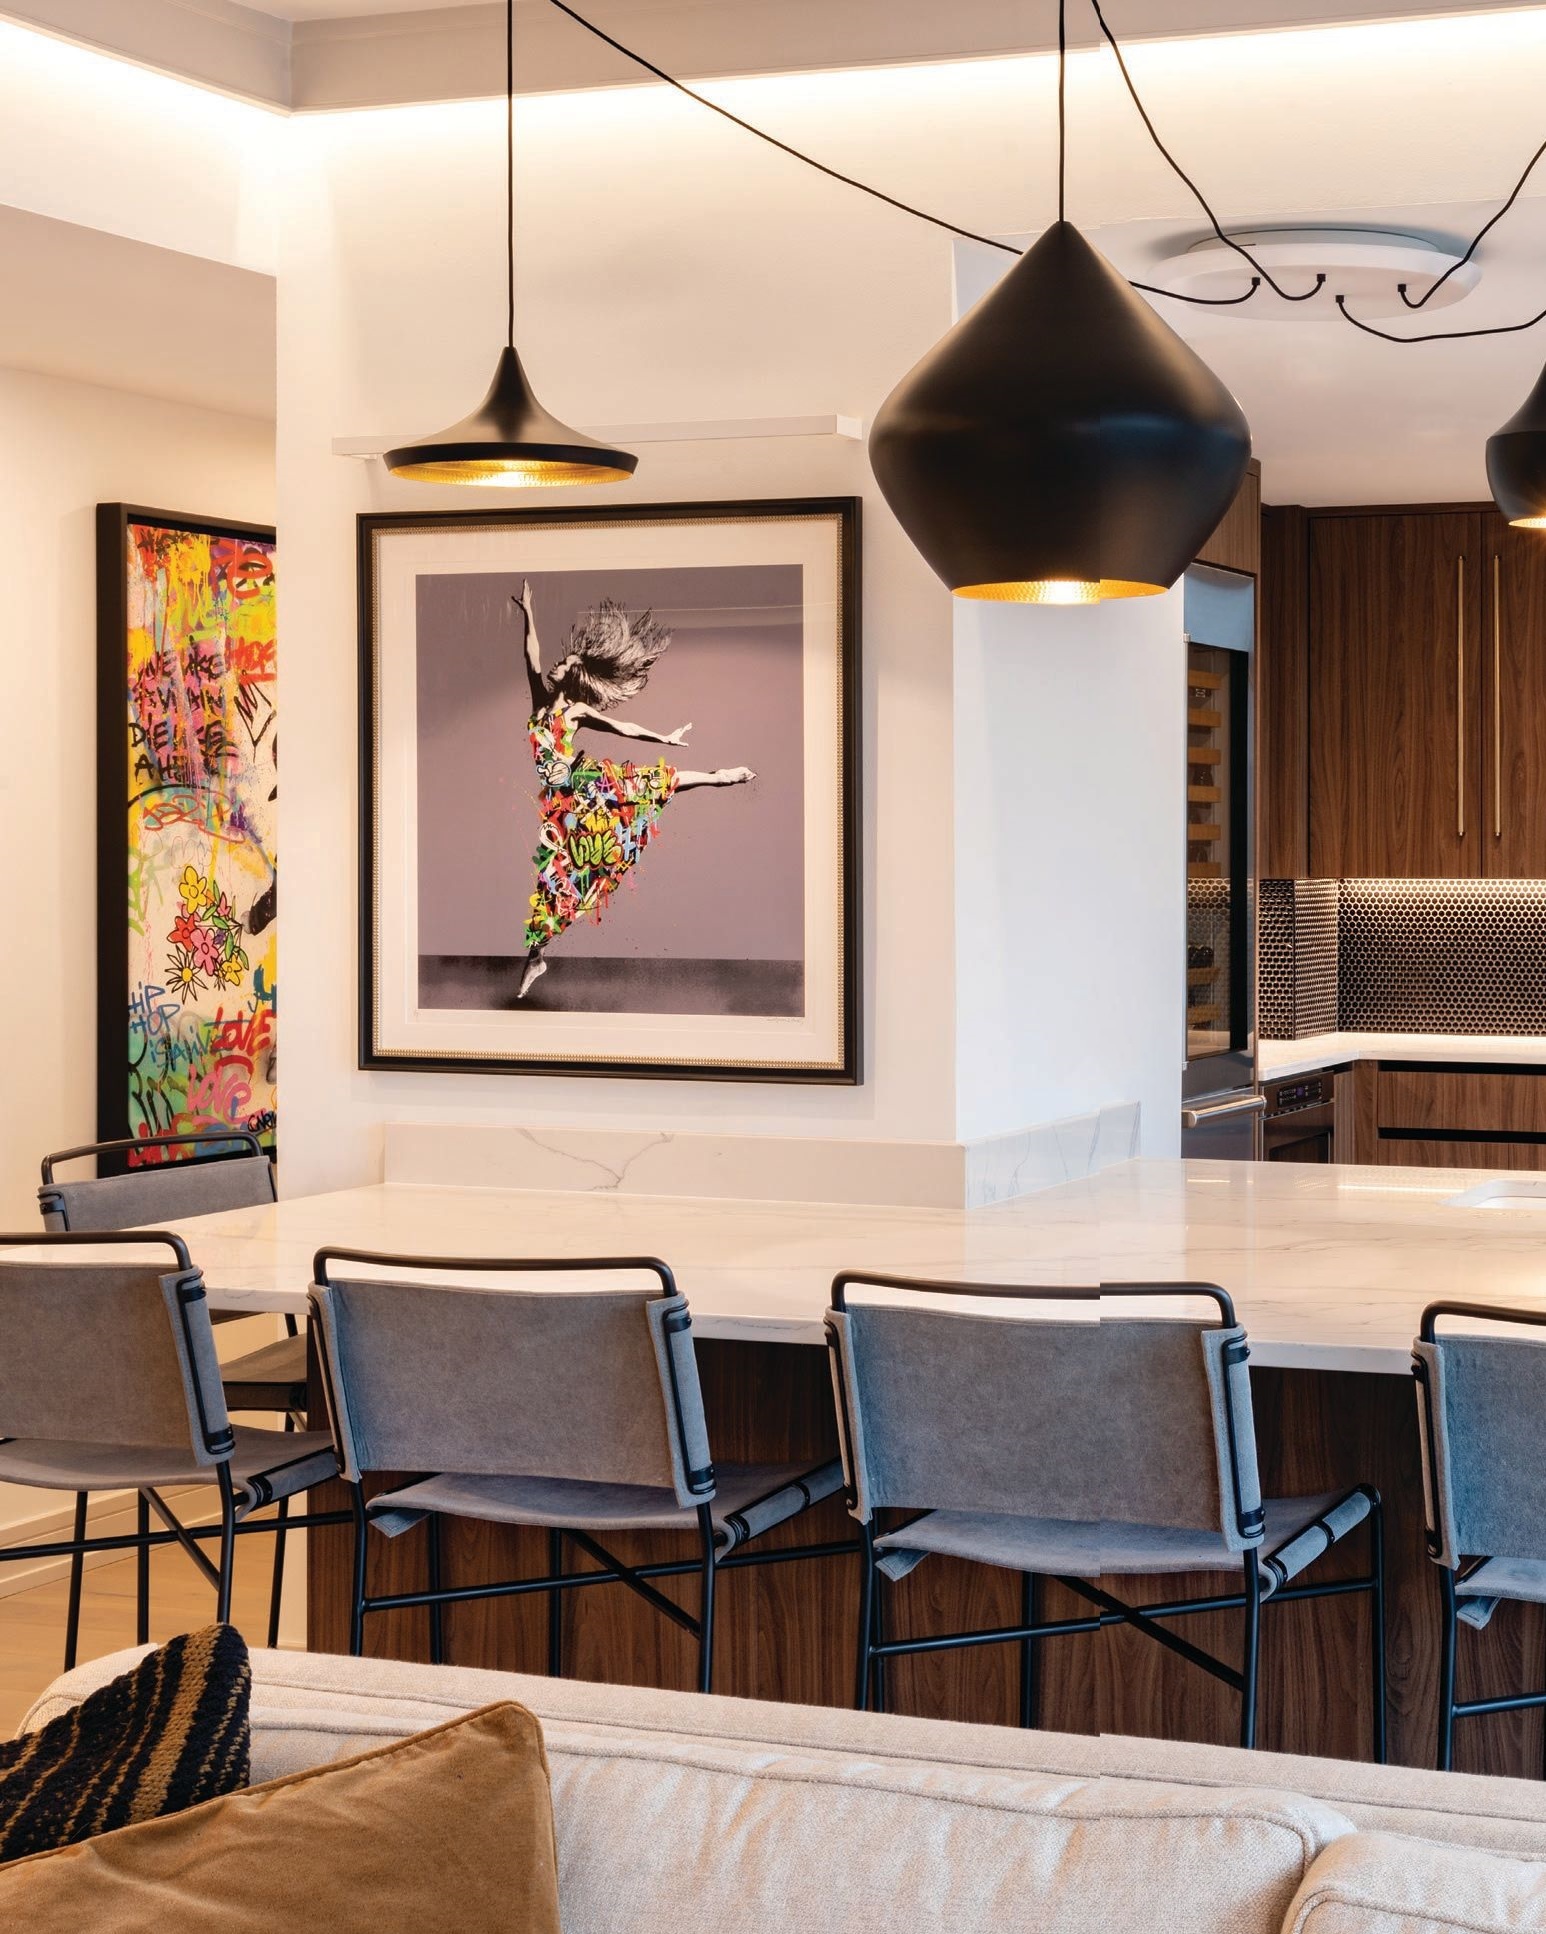 The secondary kitchen pops with Martin Whatson’s artwork “Dancer,” a Beat Range round multi-light LED pendant light and Perkins bar and counter stools by Pottery Barn, with an original artwork by Onemizer visible in the hallway. Photographed by Kyle Flubacker